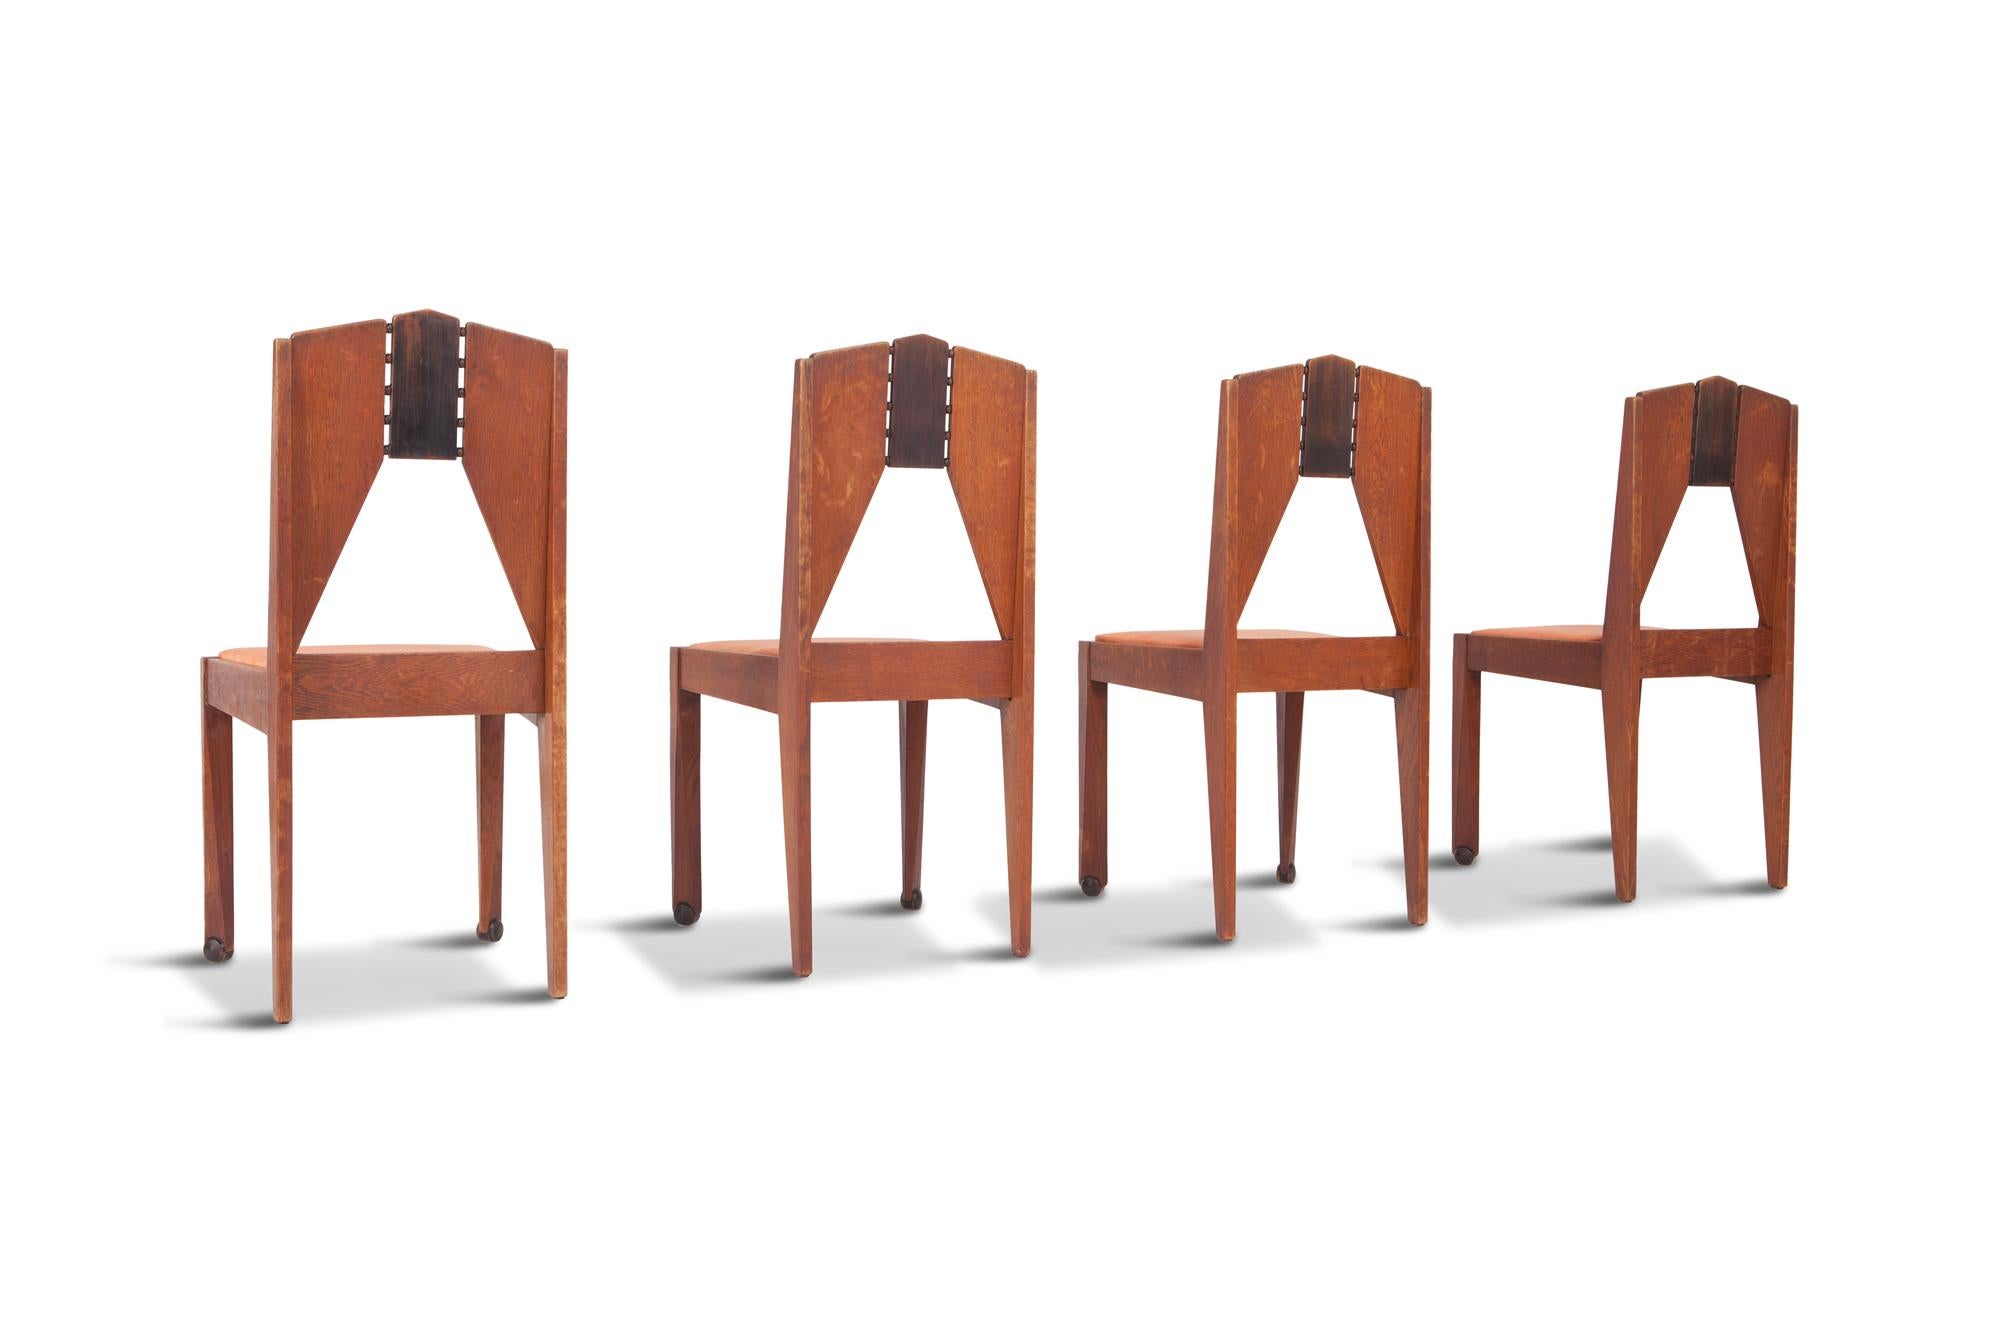 Oak dining chairs in a rare skin velvet upholstery by the Amsterdam School.

Amazing woodwork showing true craftsmanship, the detailing gives these chairs a very modern appearance. Truly exceptional for their age. 

The Netherlands, 1930s.
   